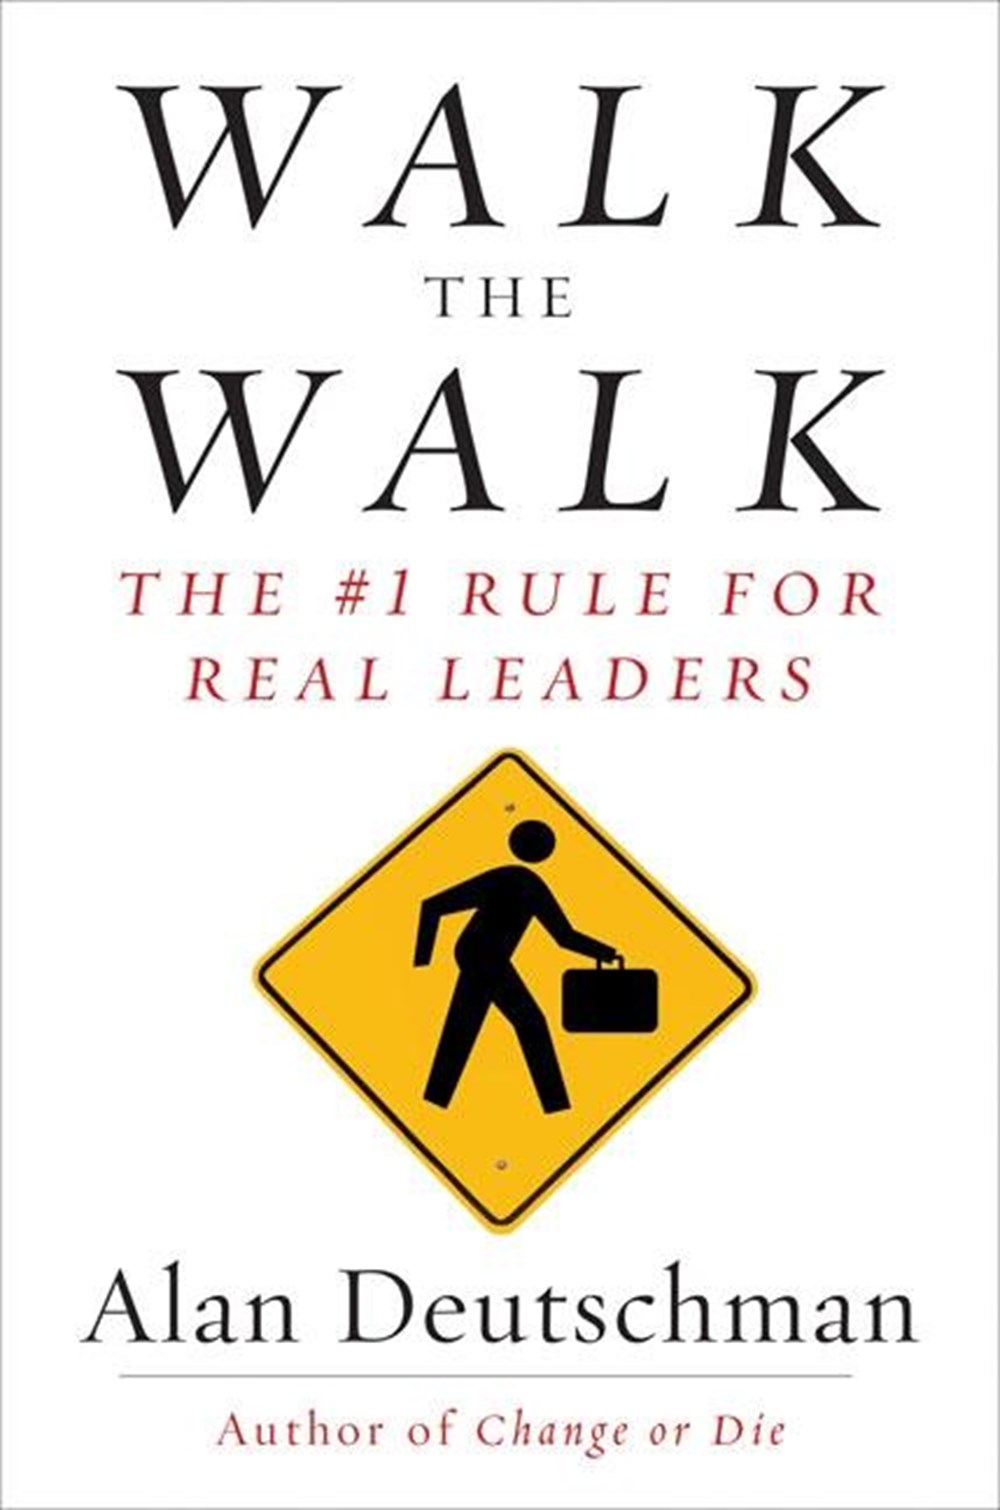 Walk the Walk: The #1 Rule for Real Leaders